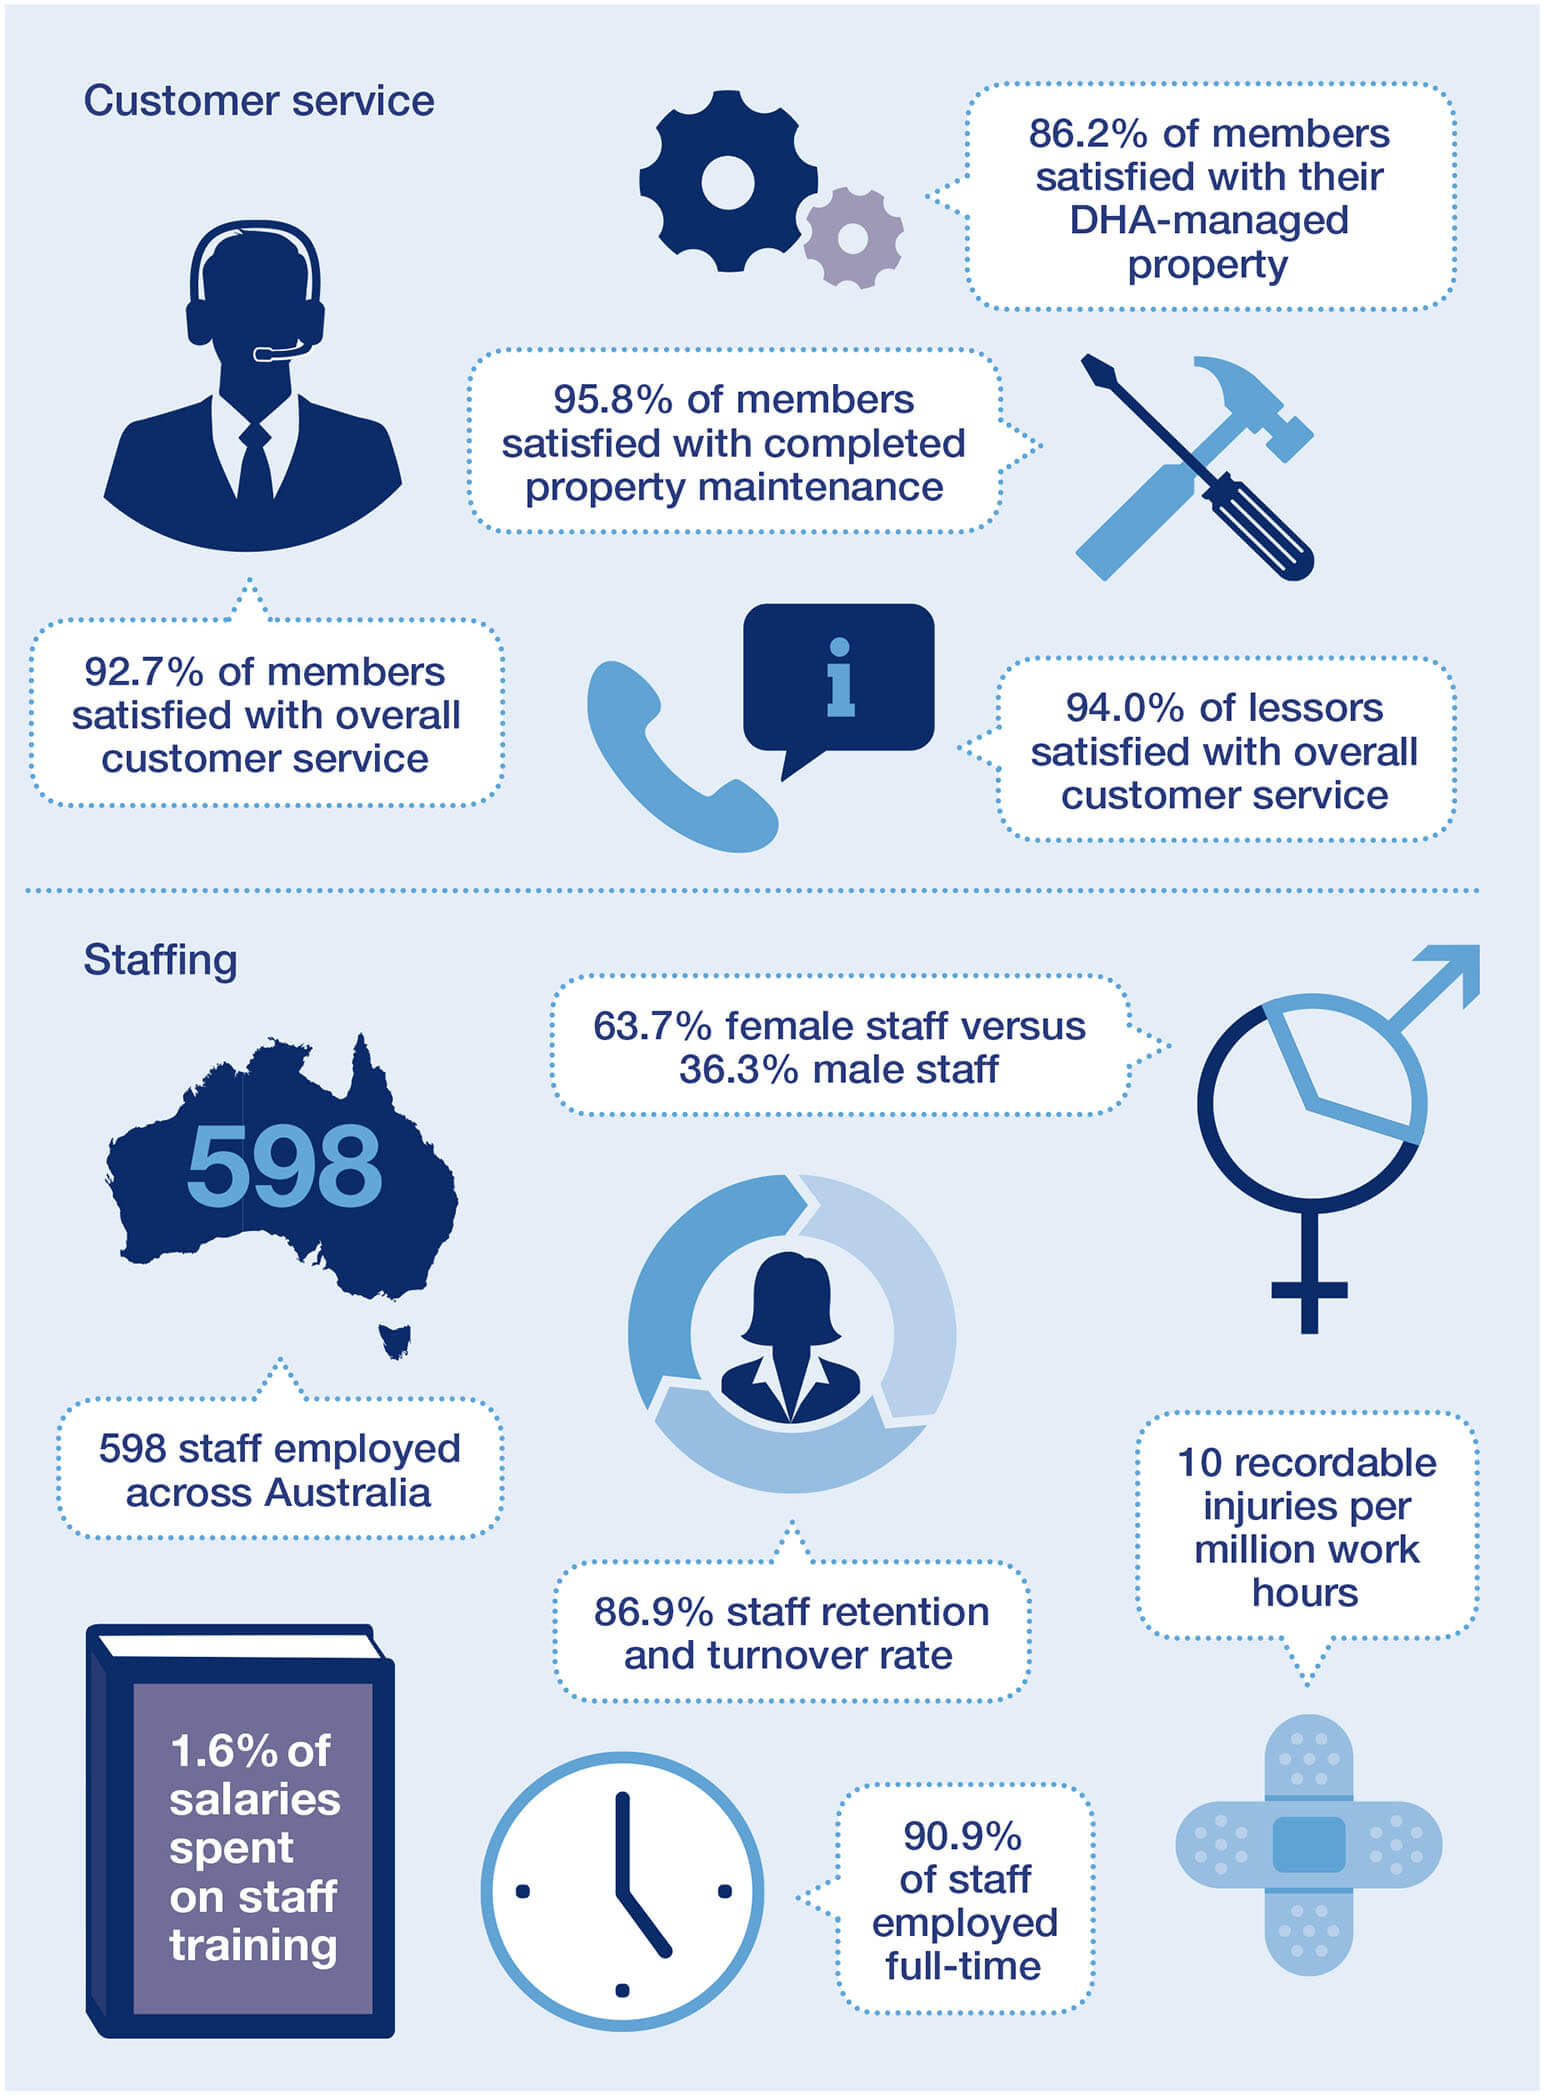 86.2% of members
satisfied with their DHA-managed property, 95.8% of members satisfied with completed property maintenance, 92.7% of members satisfied with overall customer service, 94.0% of lessors satisfied with overall customer service, 63.7% female staff versus 36.3% male staff, 598 staff employed across Australia, 86.9% staff retention and turnover rate, 10 recordable injuries per million work hours, 90.9% of staff employed full-time, 1.6% of
salaries spent on staff training.